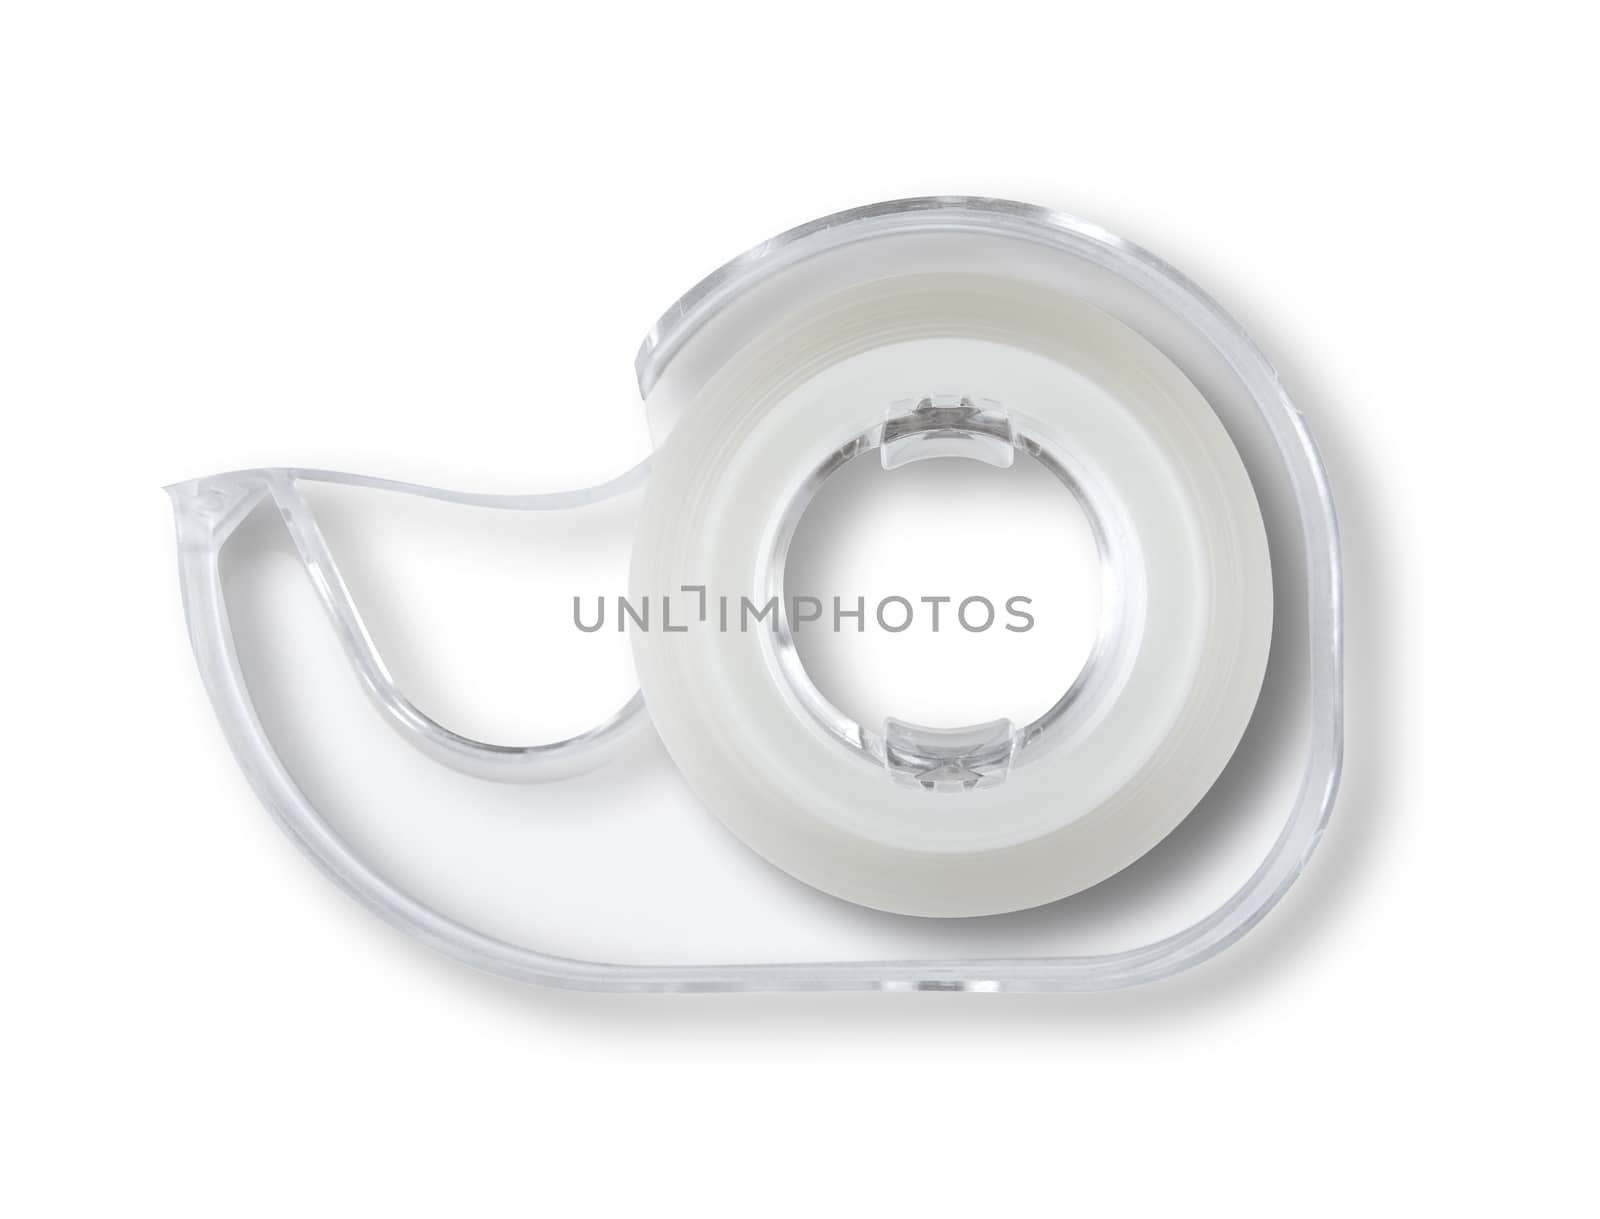 Scotch tape dispenser isolated on white background by daboost